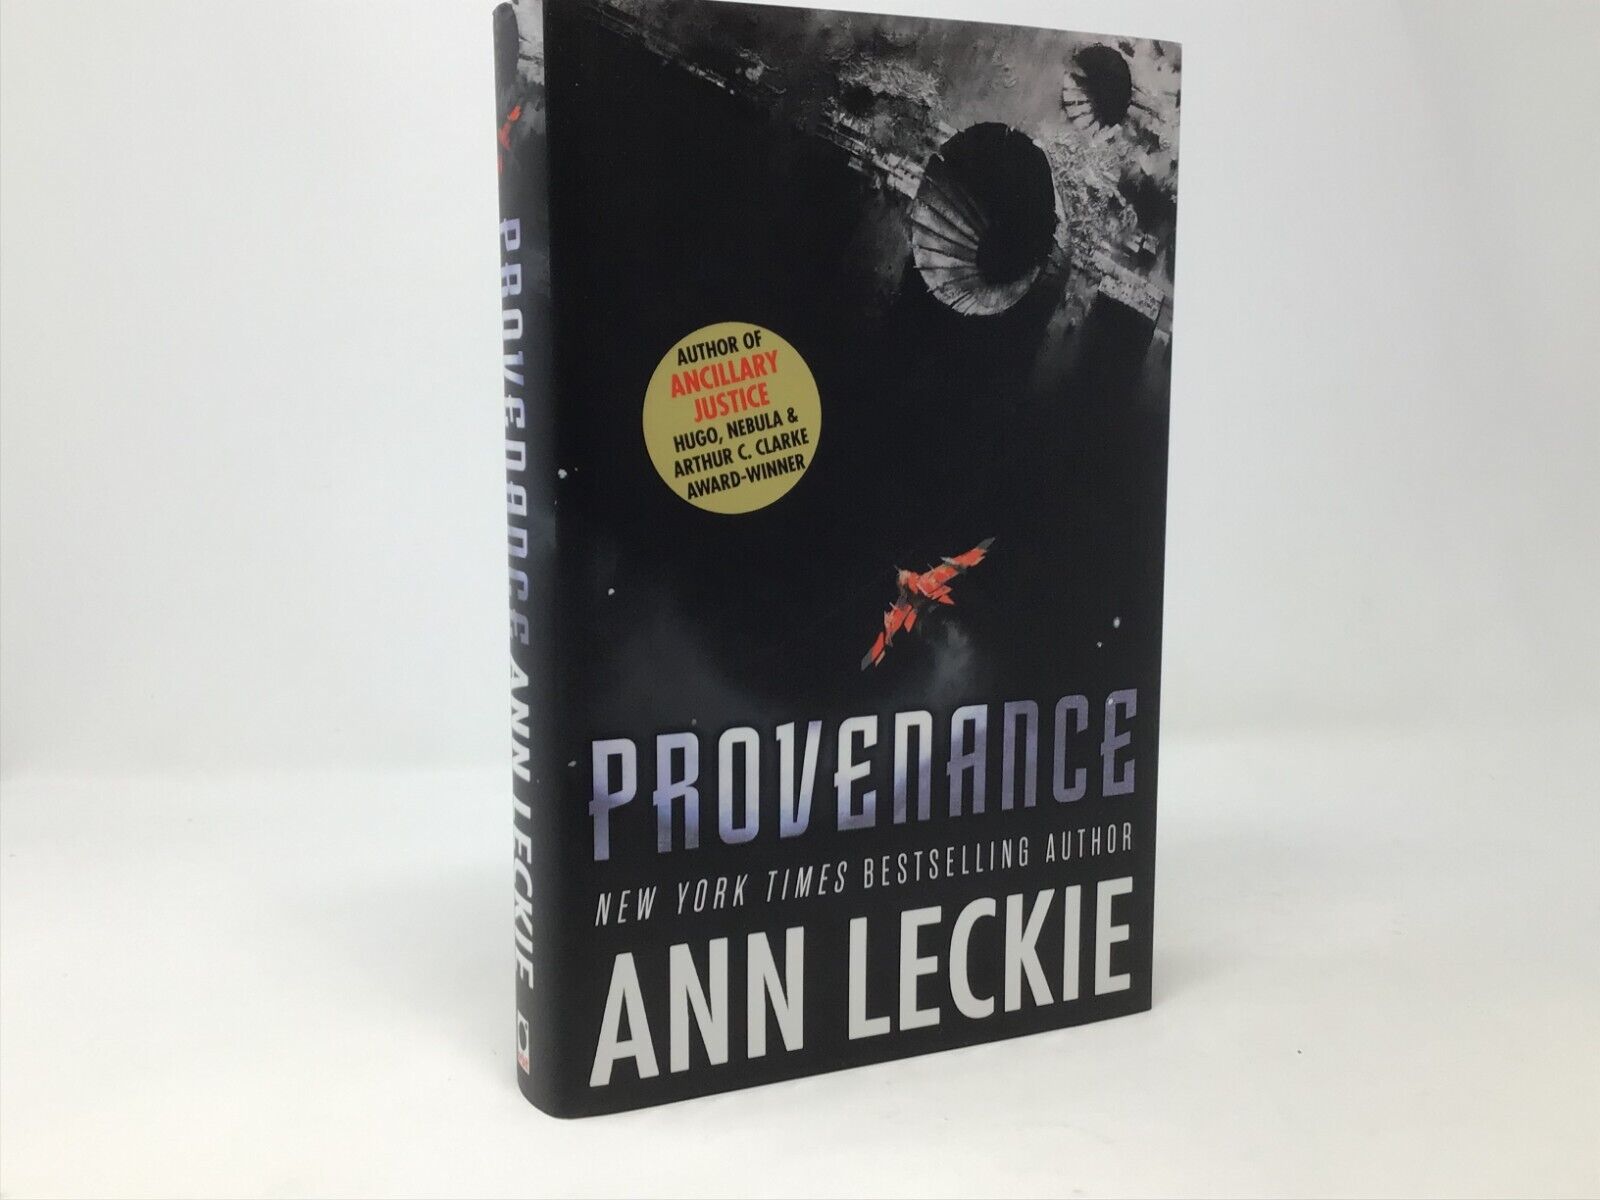 Provenance (SIGNED BOOK) by Ann Leckie